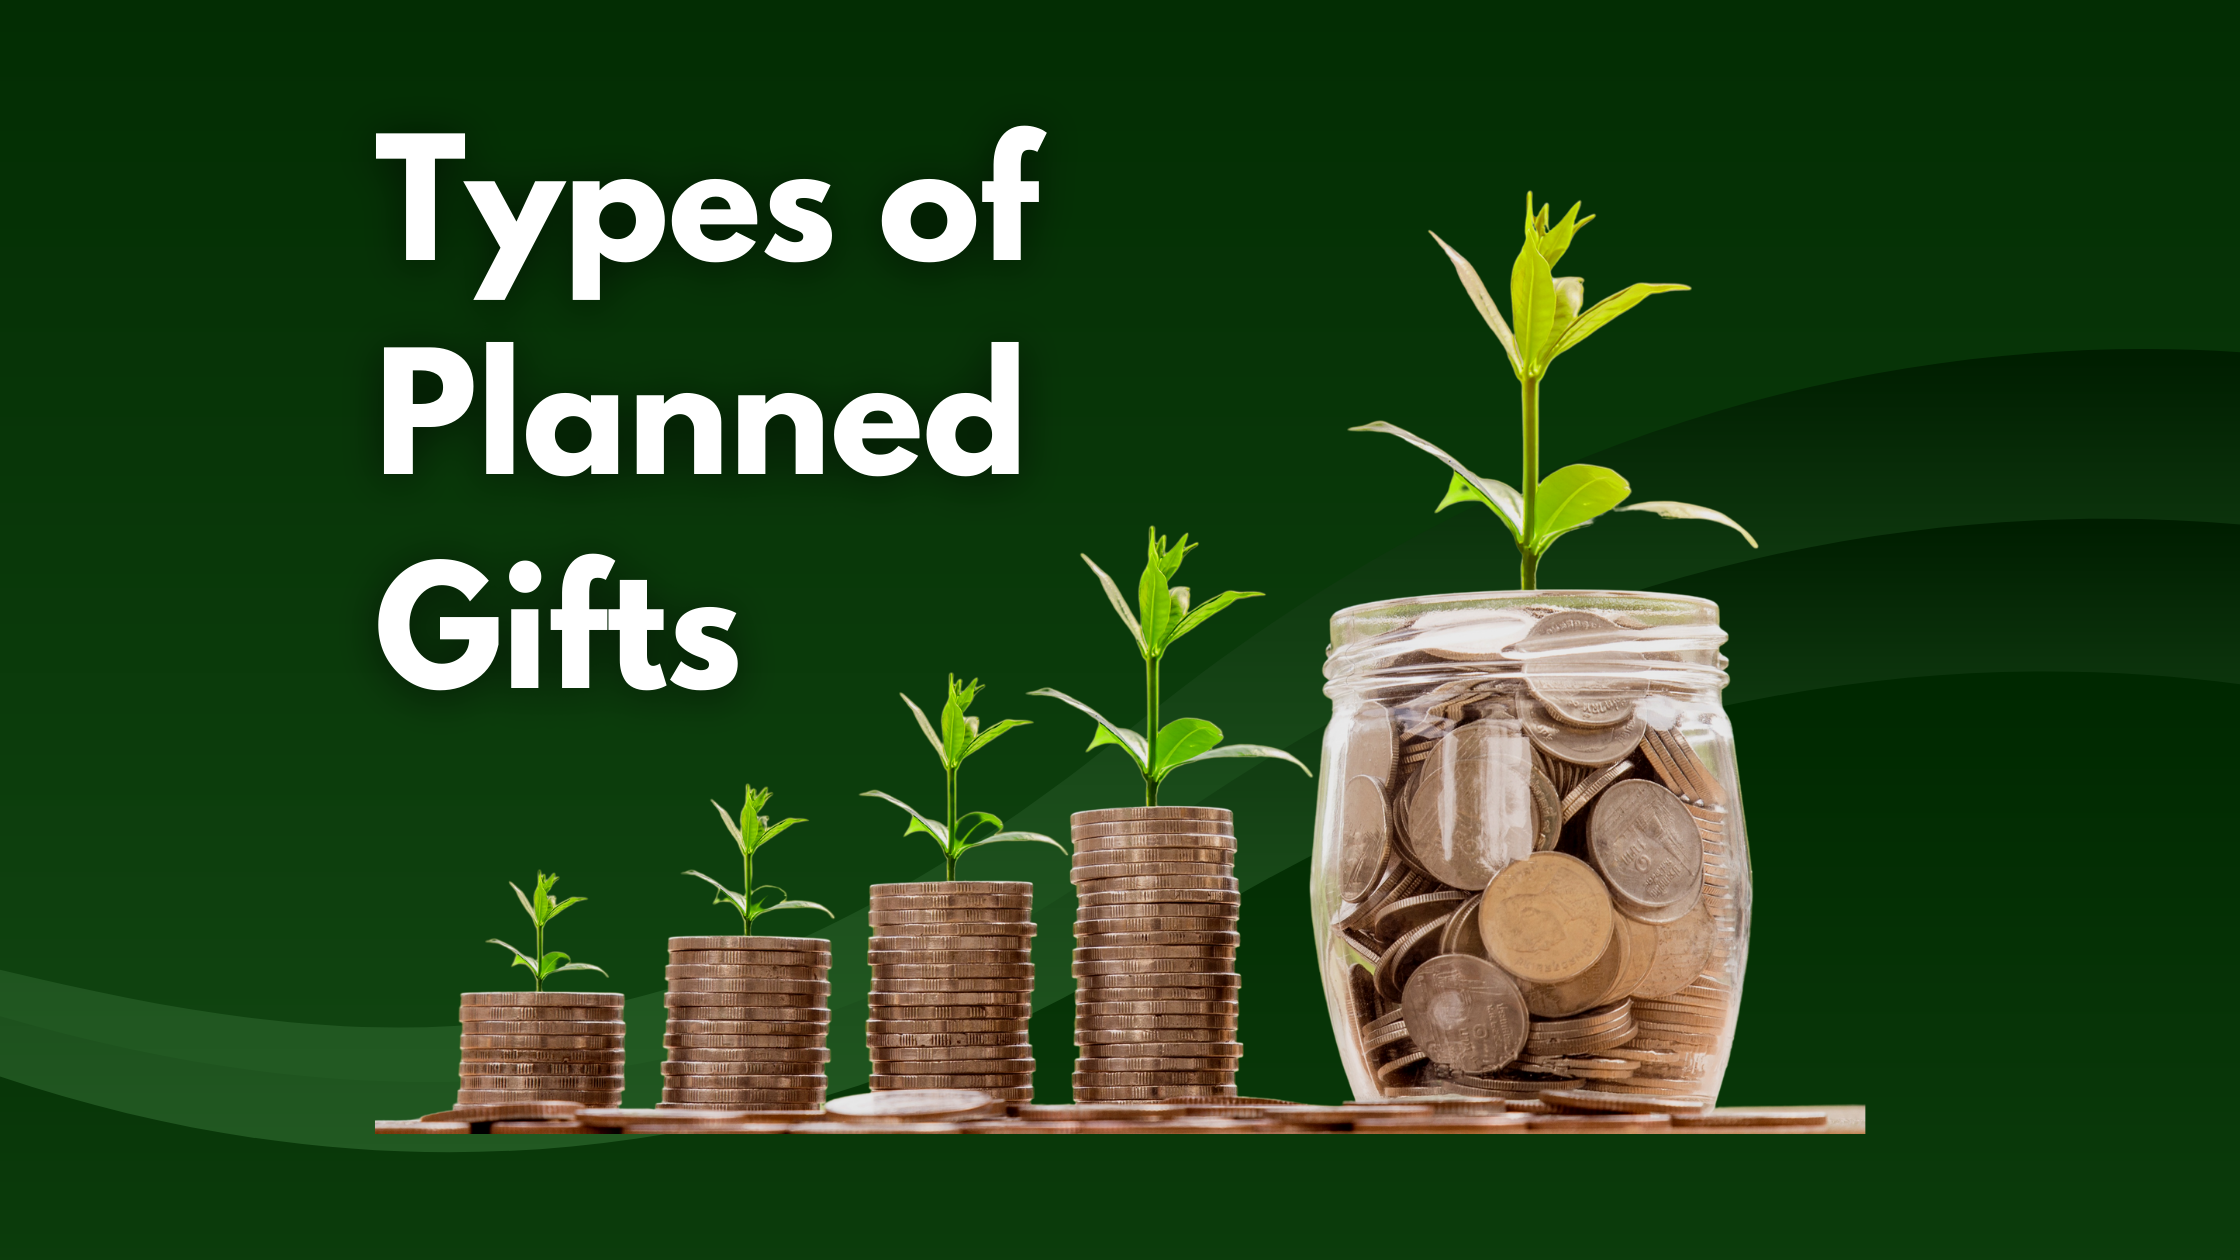 Types of Planned Gifts